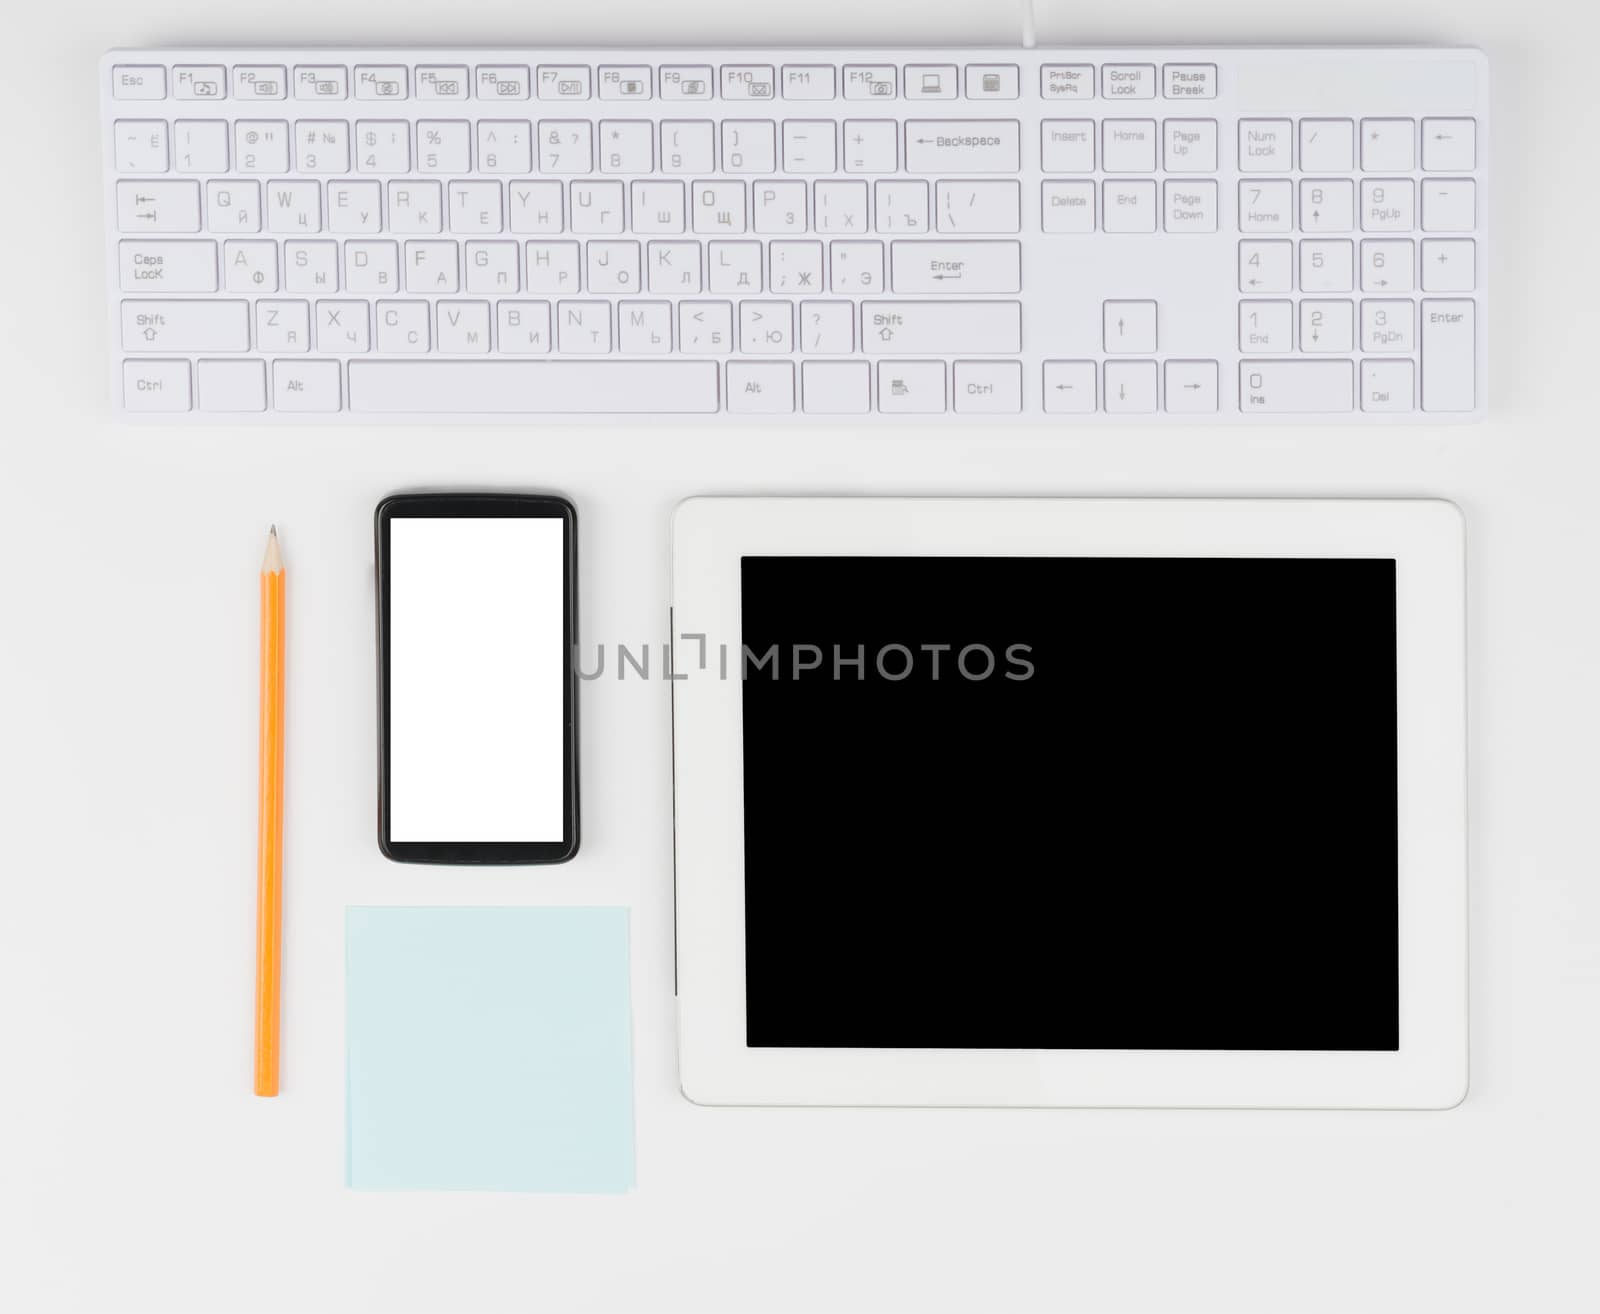 Keyboard with tablet and smartphone on isolated white background